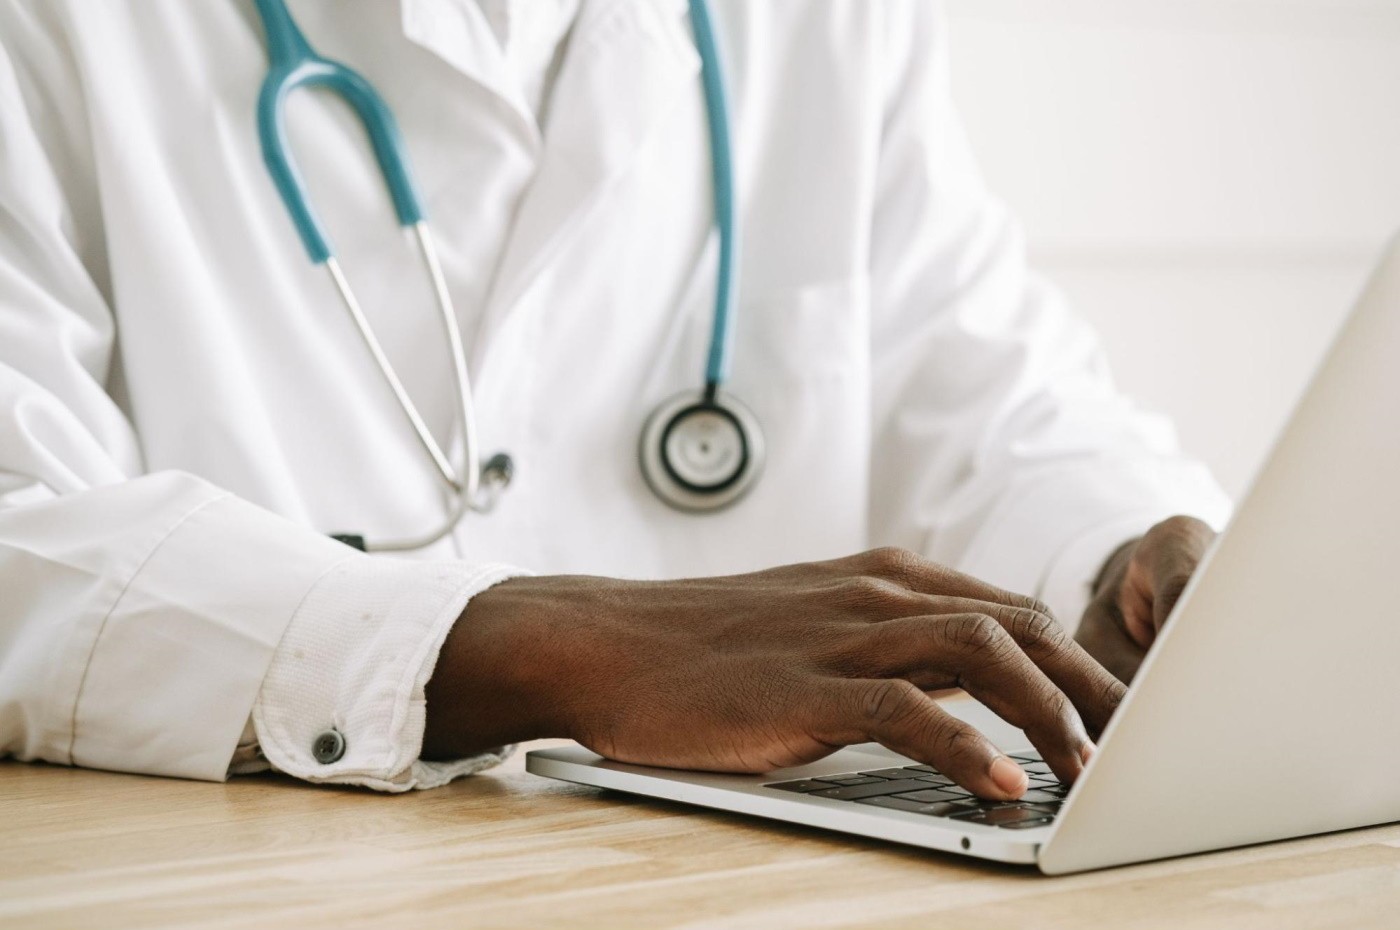 5 HIPAA Compliant Cloud Storage Options for Modern Healthcare Businesses